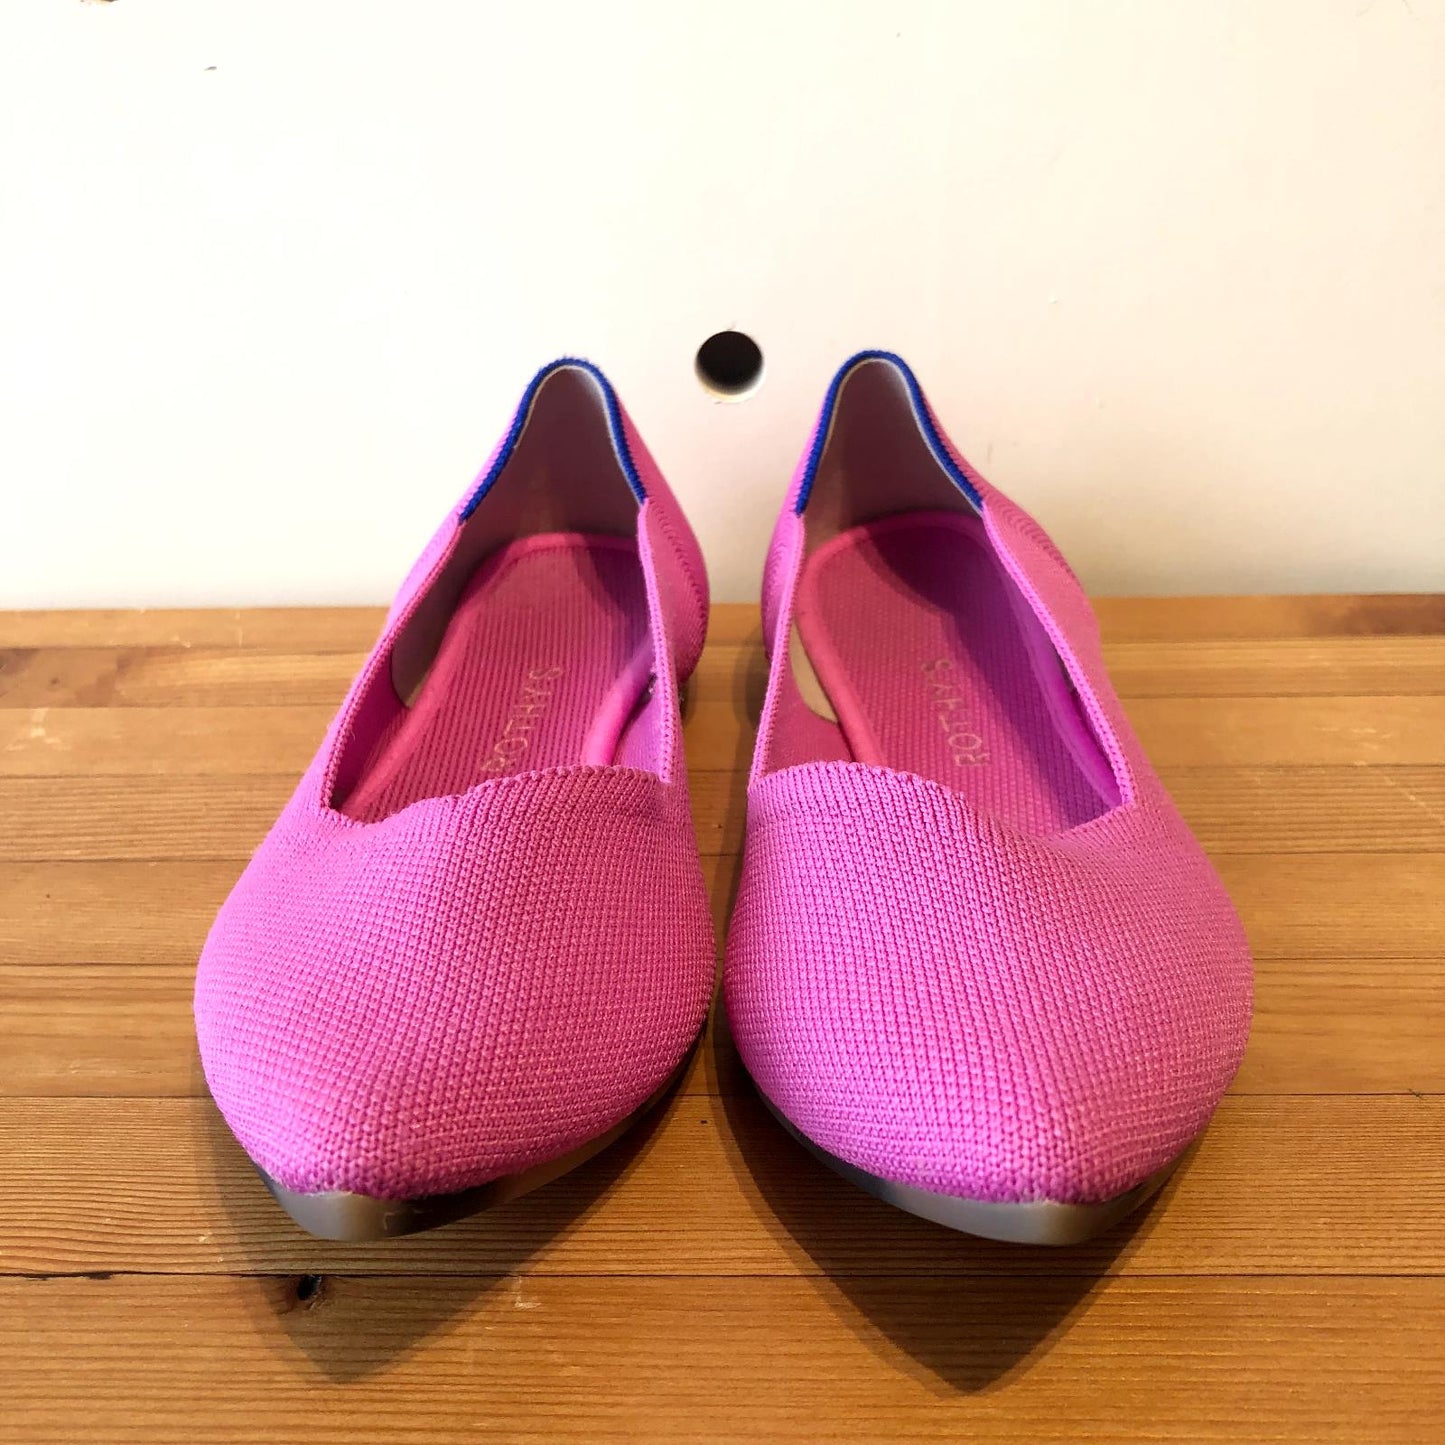 9 - Rothy's Pink Fuchsia Knit Retired Ballet Flats Pointed Toe Shoes 0316AO